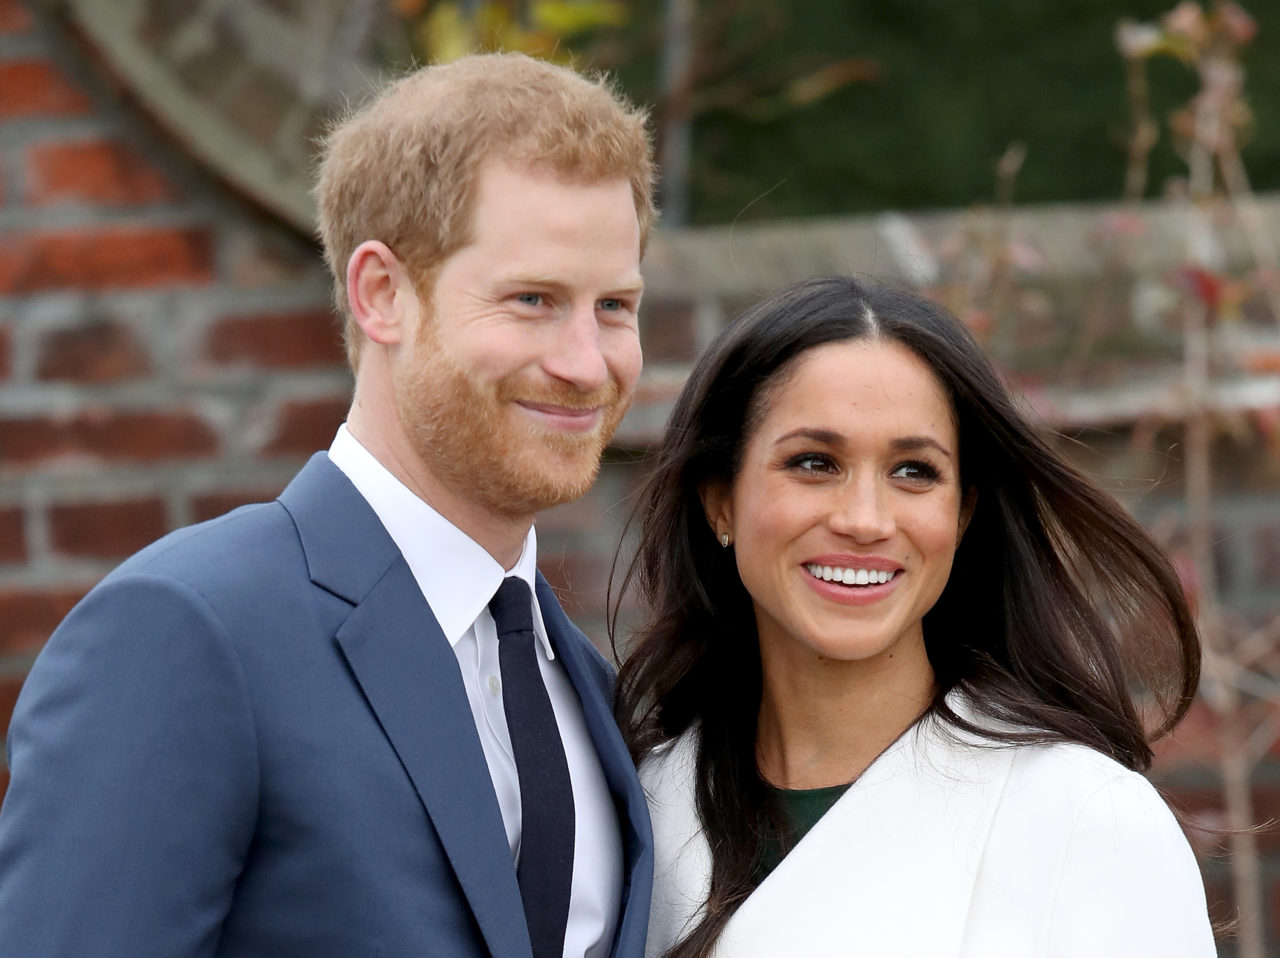 Meghan Markle and Prince Harry, The Duchess and Duke of Sussex